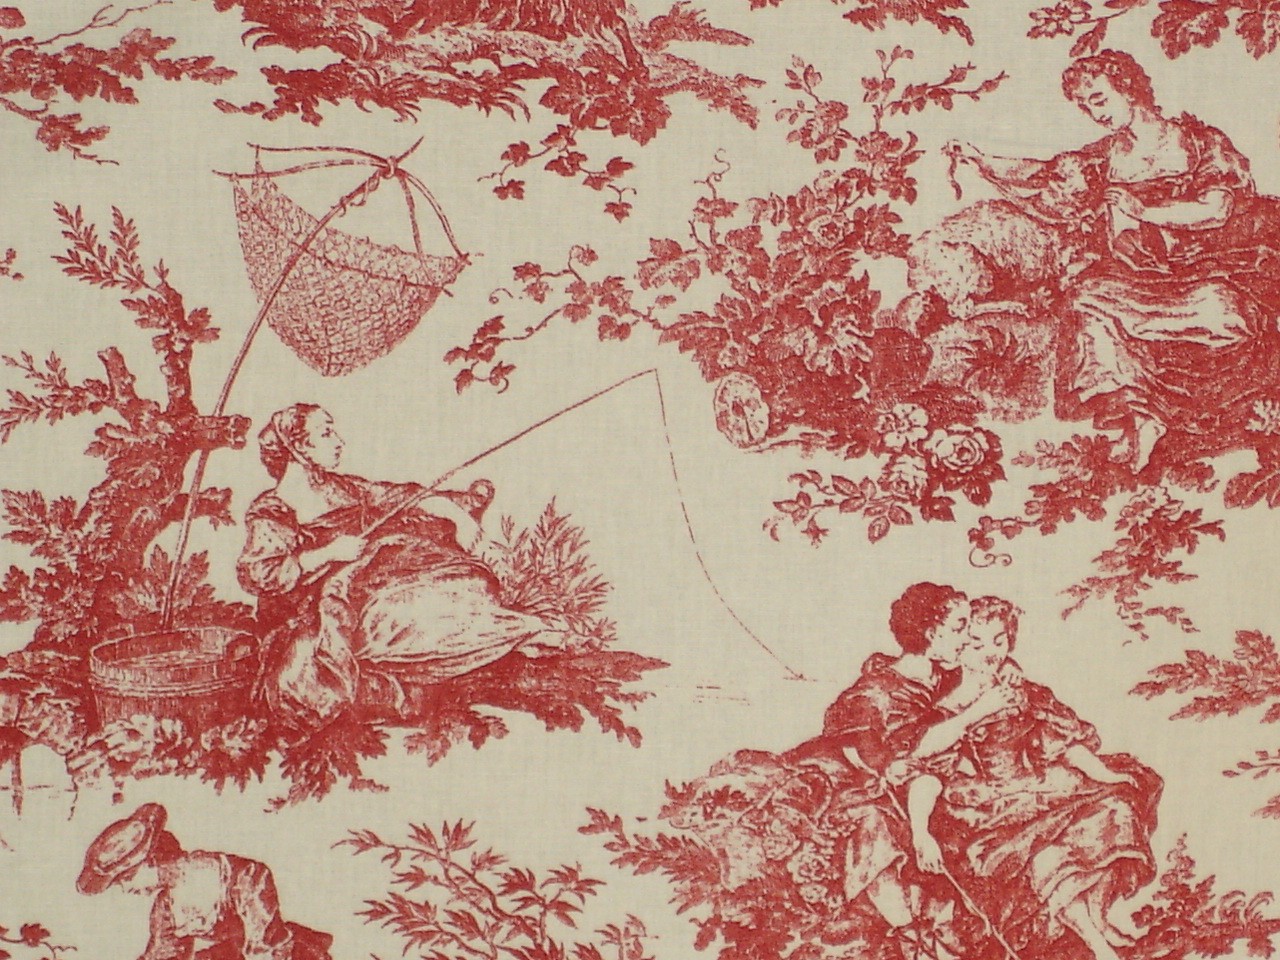 and now for crimson blood red swatches of fabulous red toile